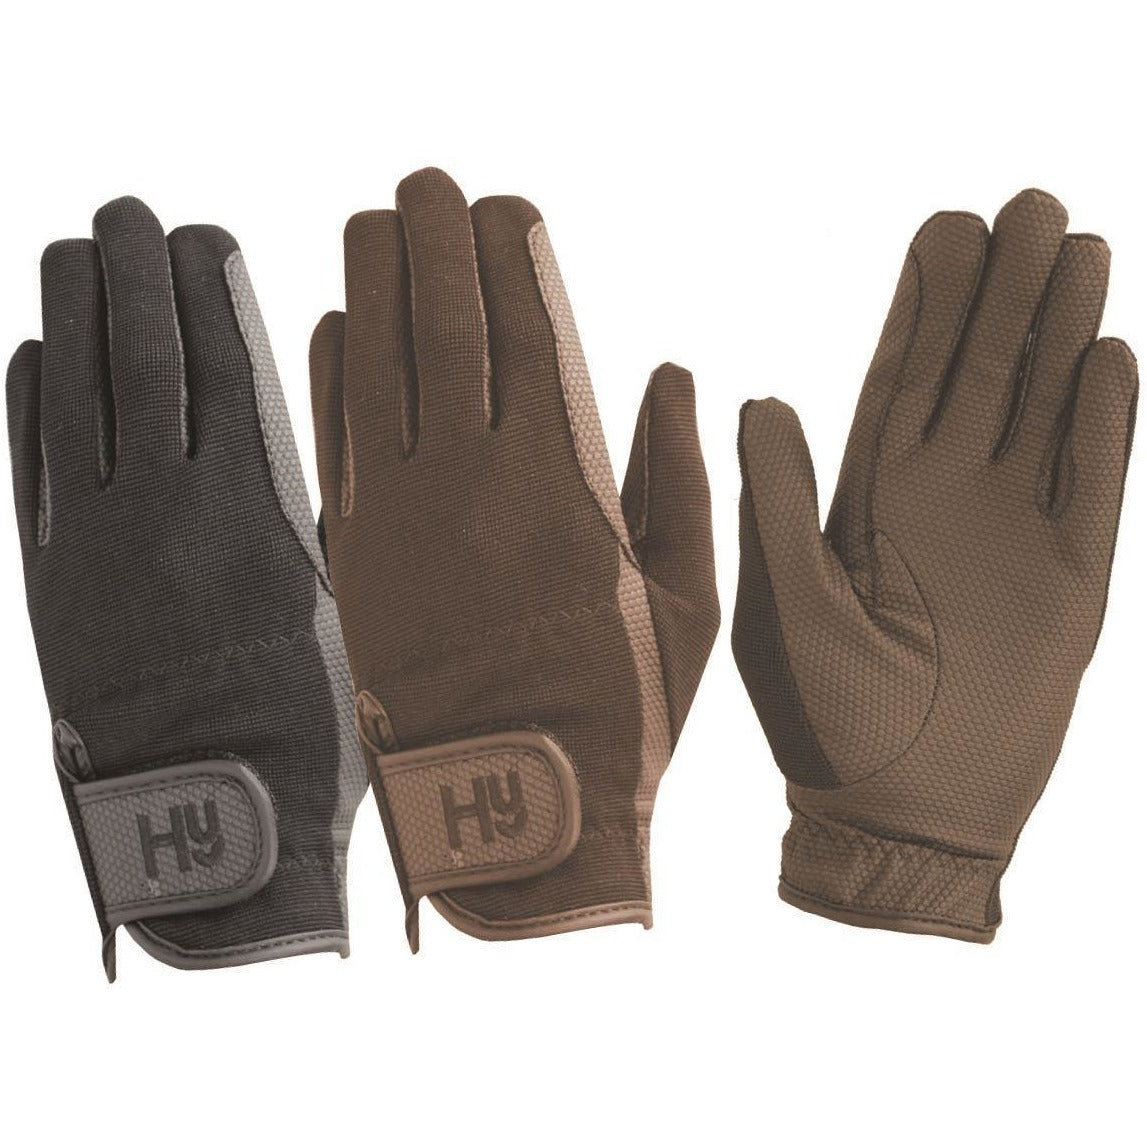 Hy5 Pro Competition Grip-Handschuhe